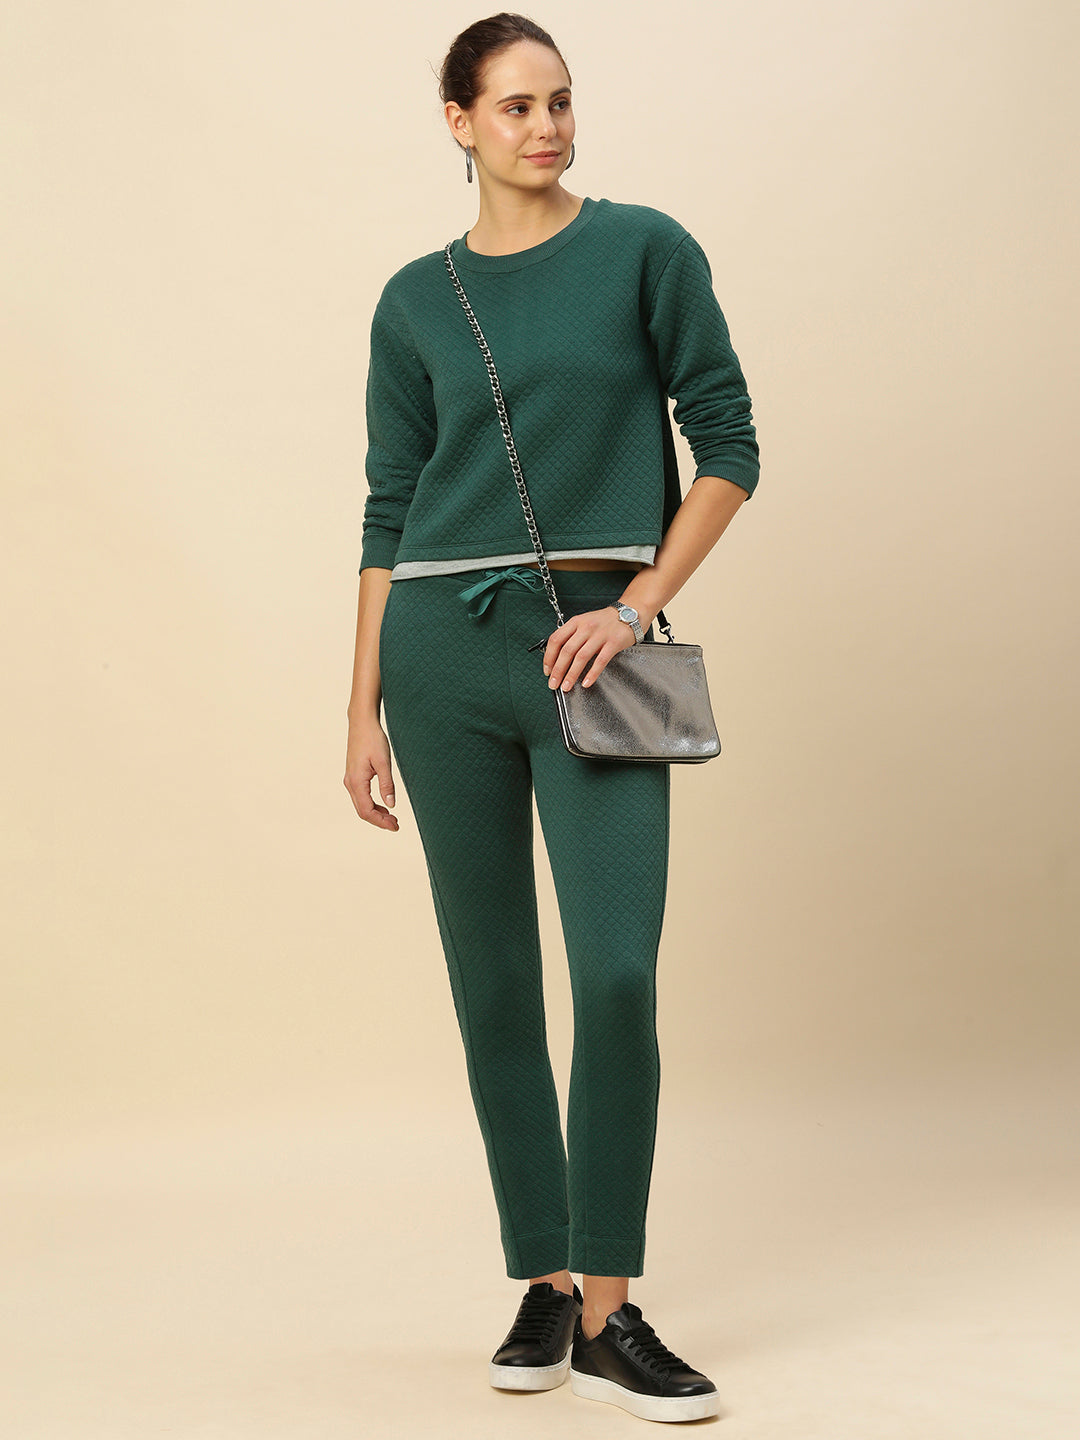 QUILTED JERSEY SWEATSHIRT & SLIM PEG PANT CO - ORD SET